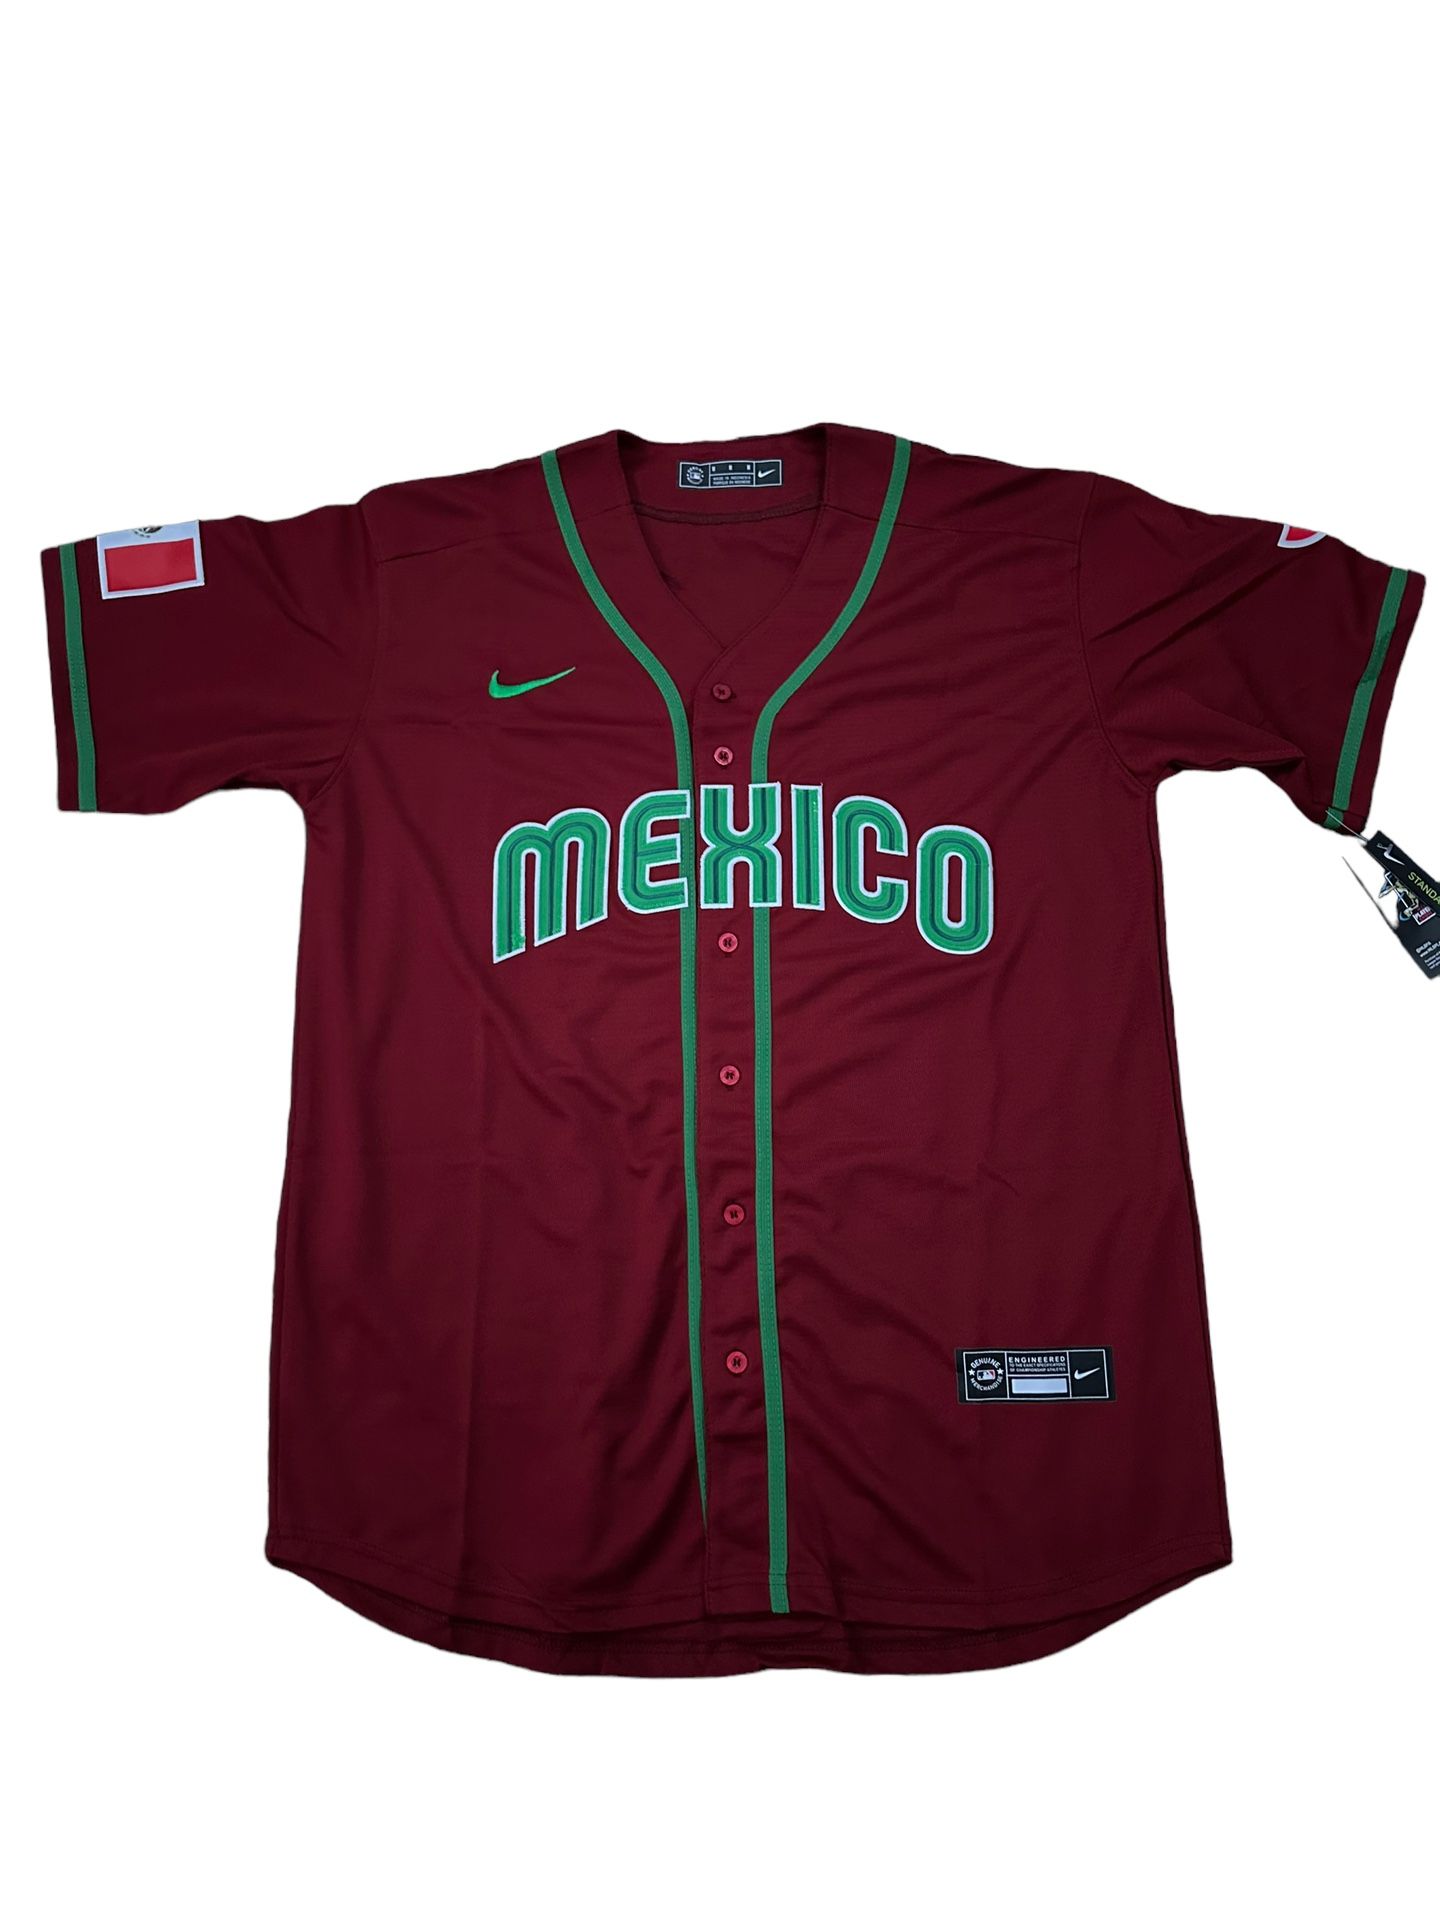 World Baseball Classic Mexico National Team Baseball Jersey for Sale in  Mesa, AZ - OfferUp